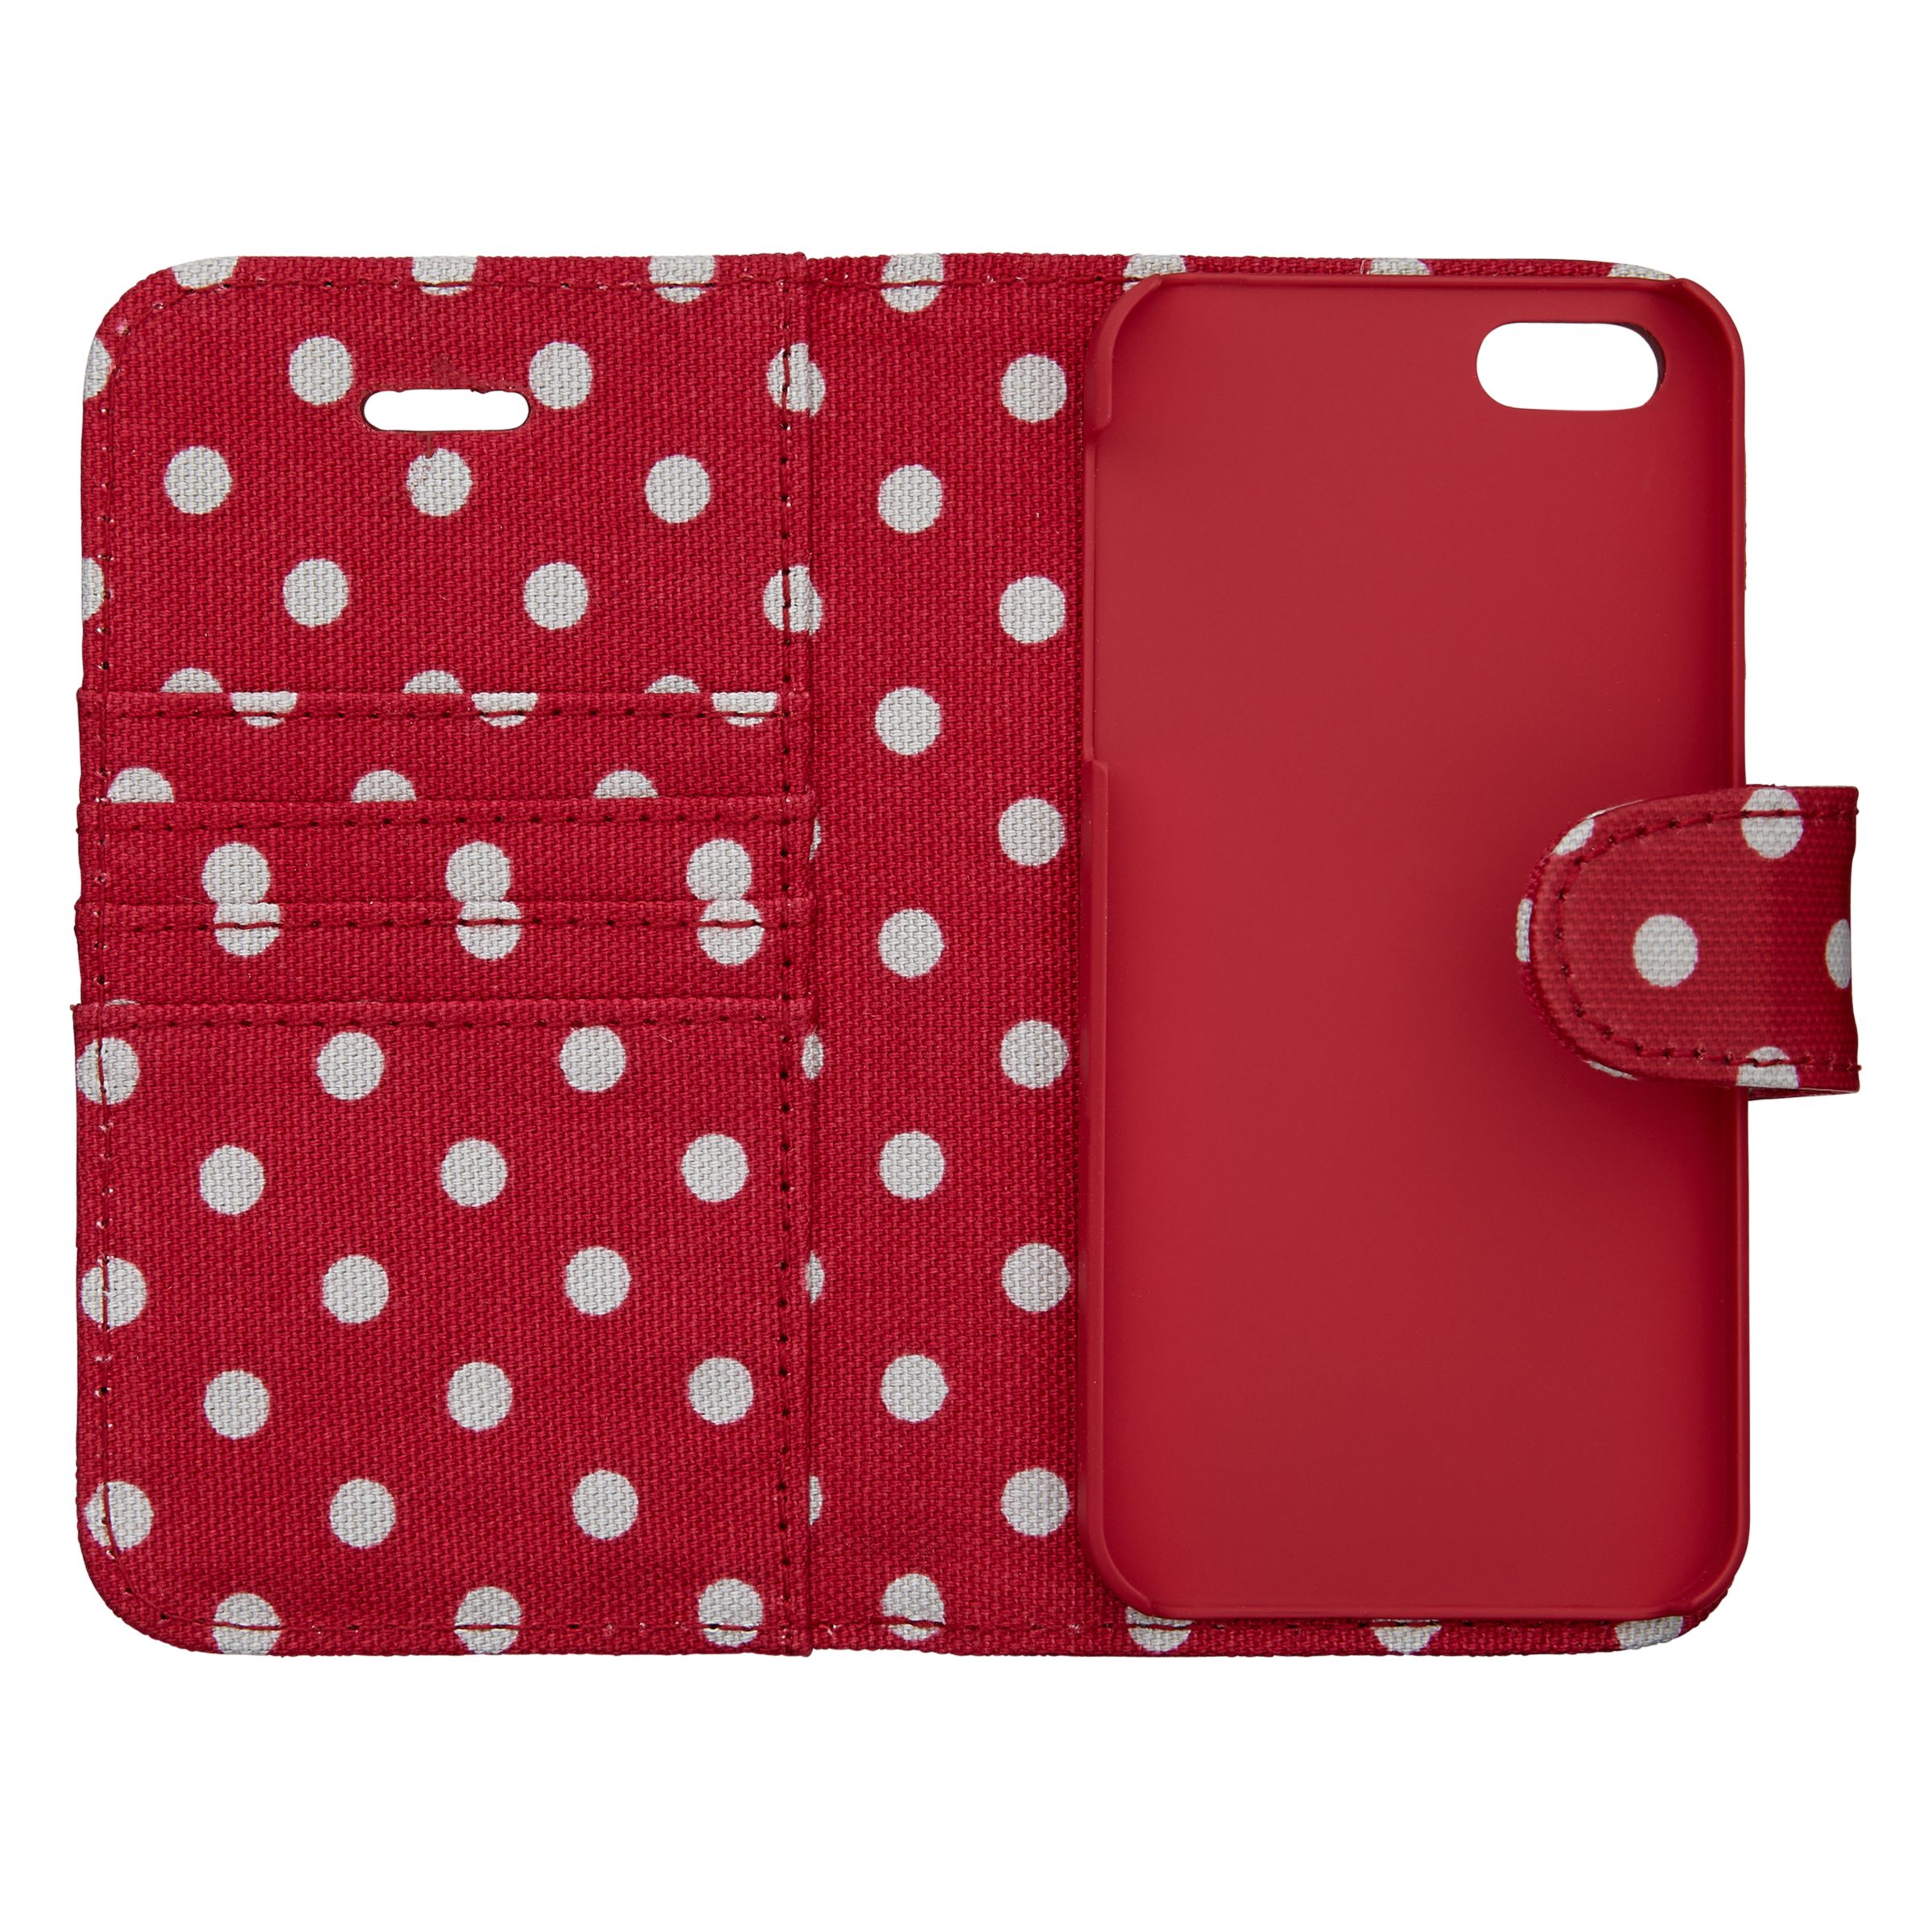 Cath Kidston Spotted Print iPhone 5 